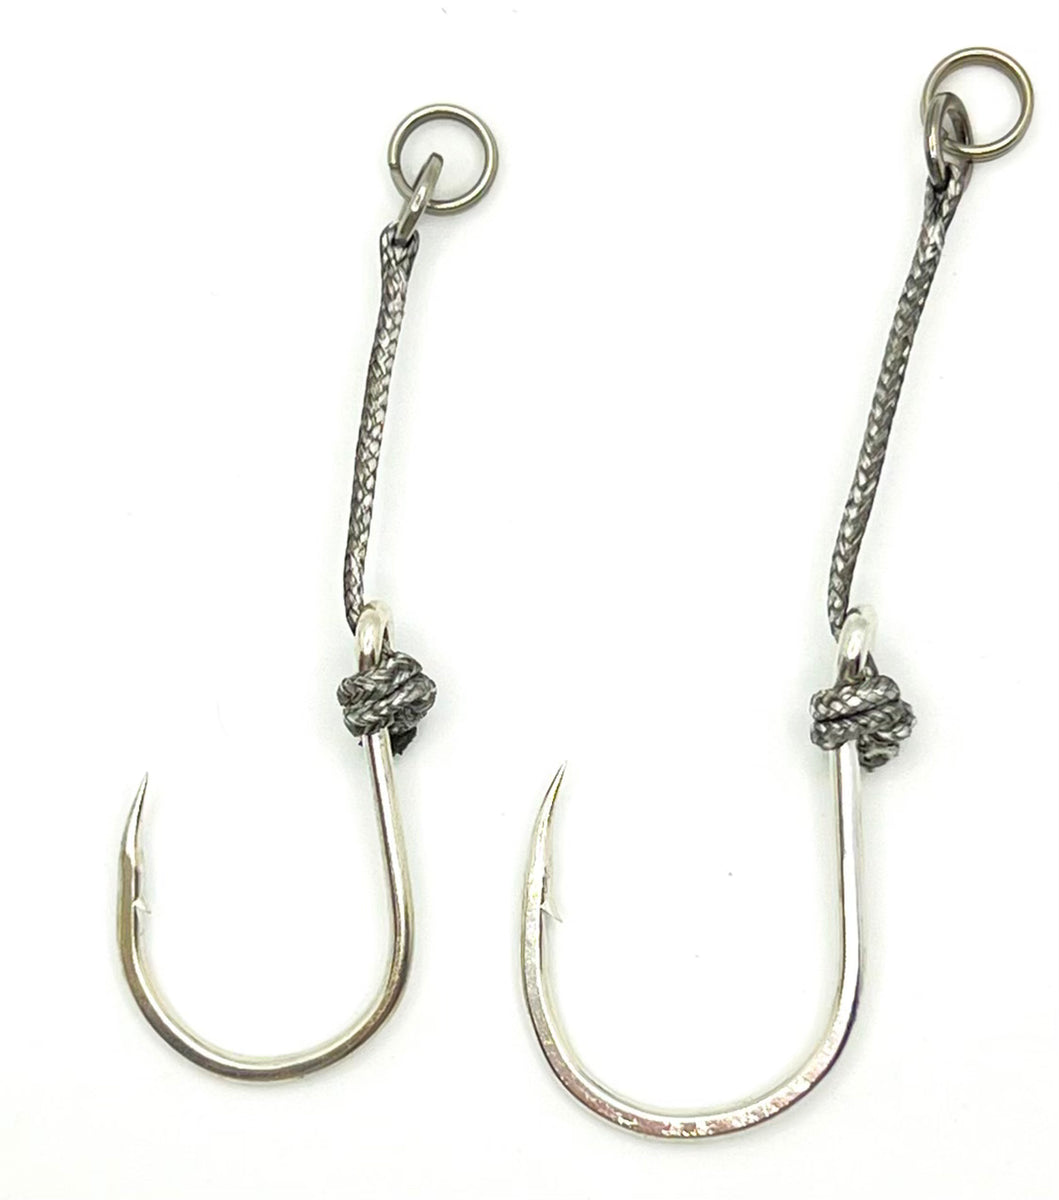 JYG Tuna Single Assist Hook With Feather - Capt. Harry's – Capt. Harry's  Fishing Supply